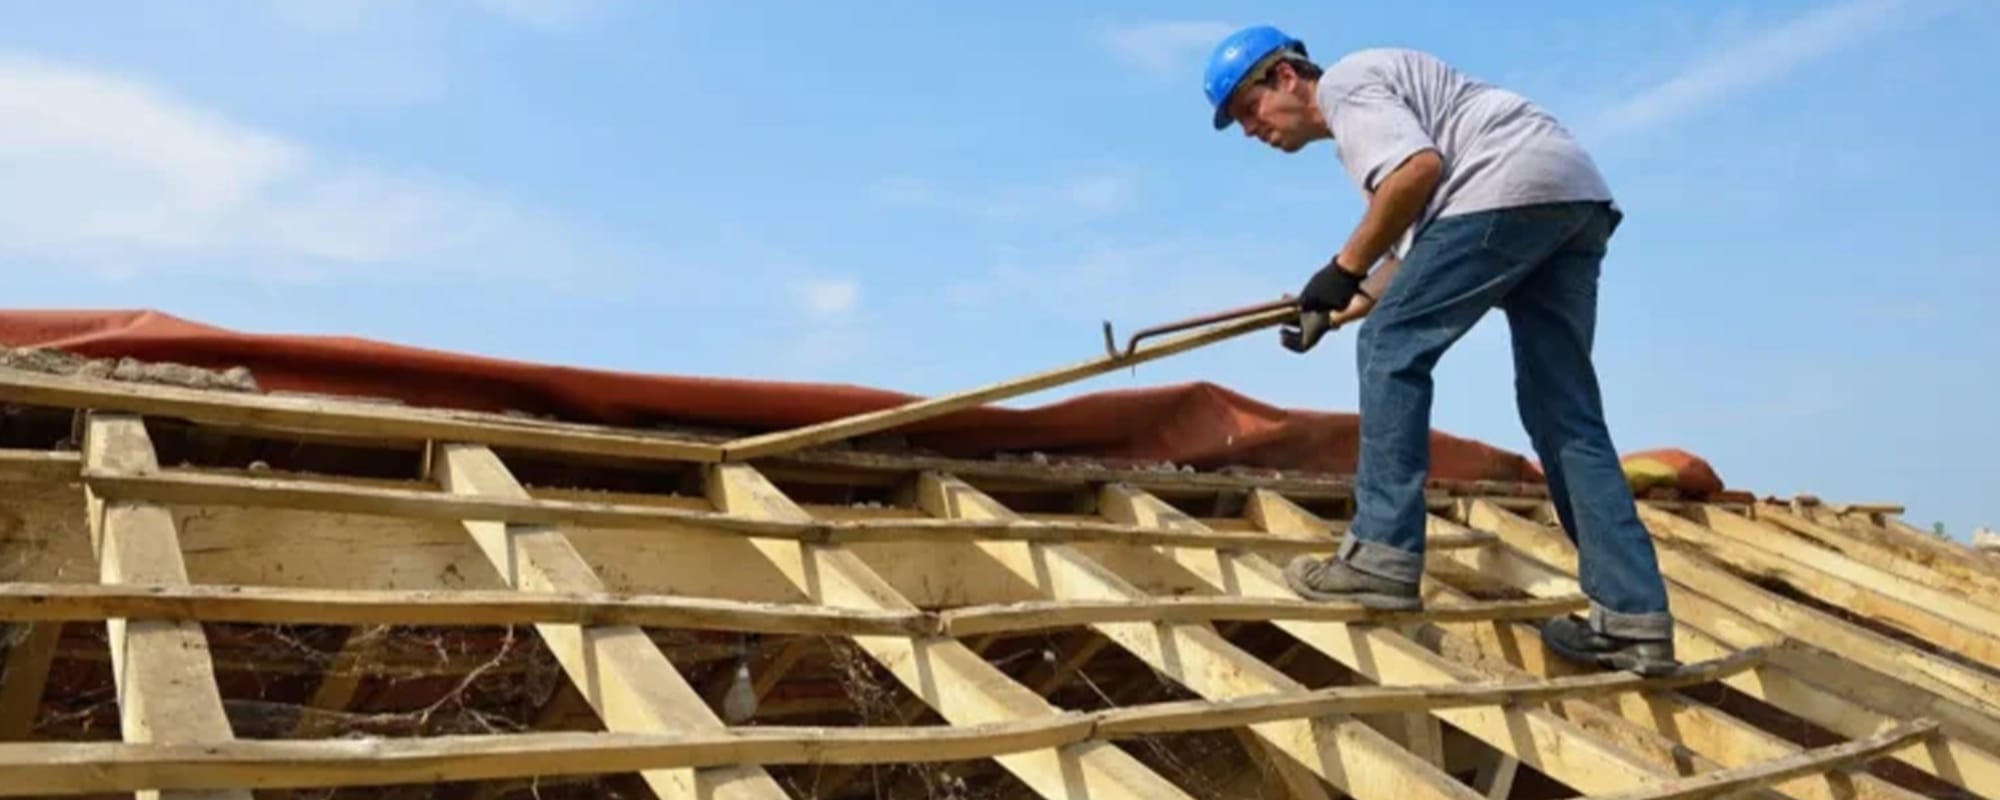 Reasons You Should Hire a Professional Roofer